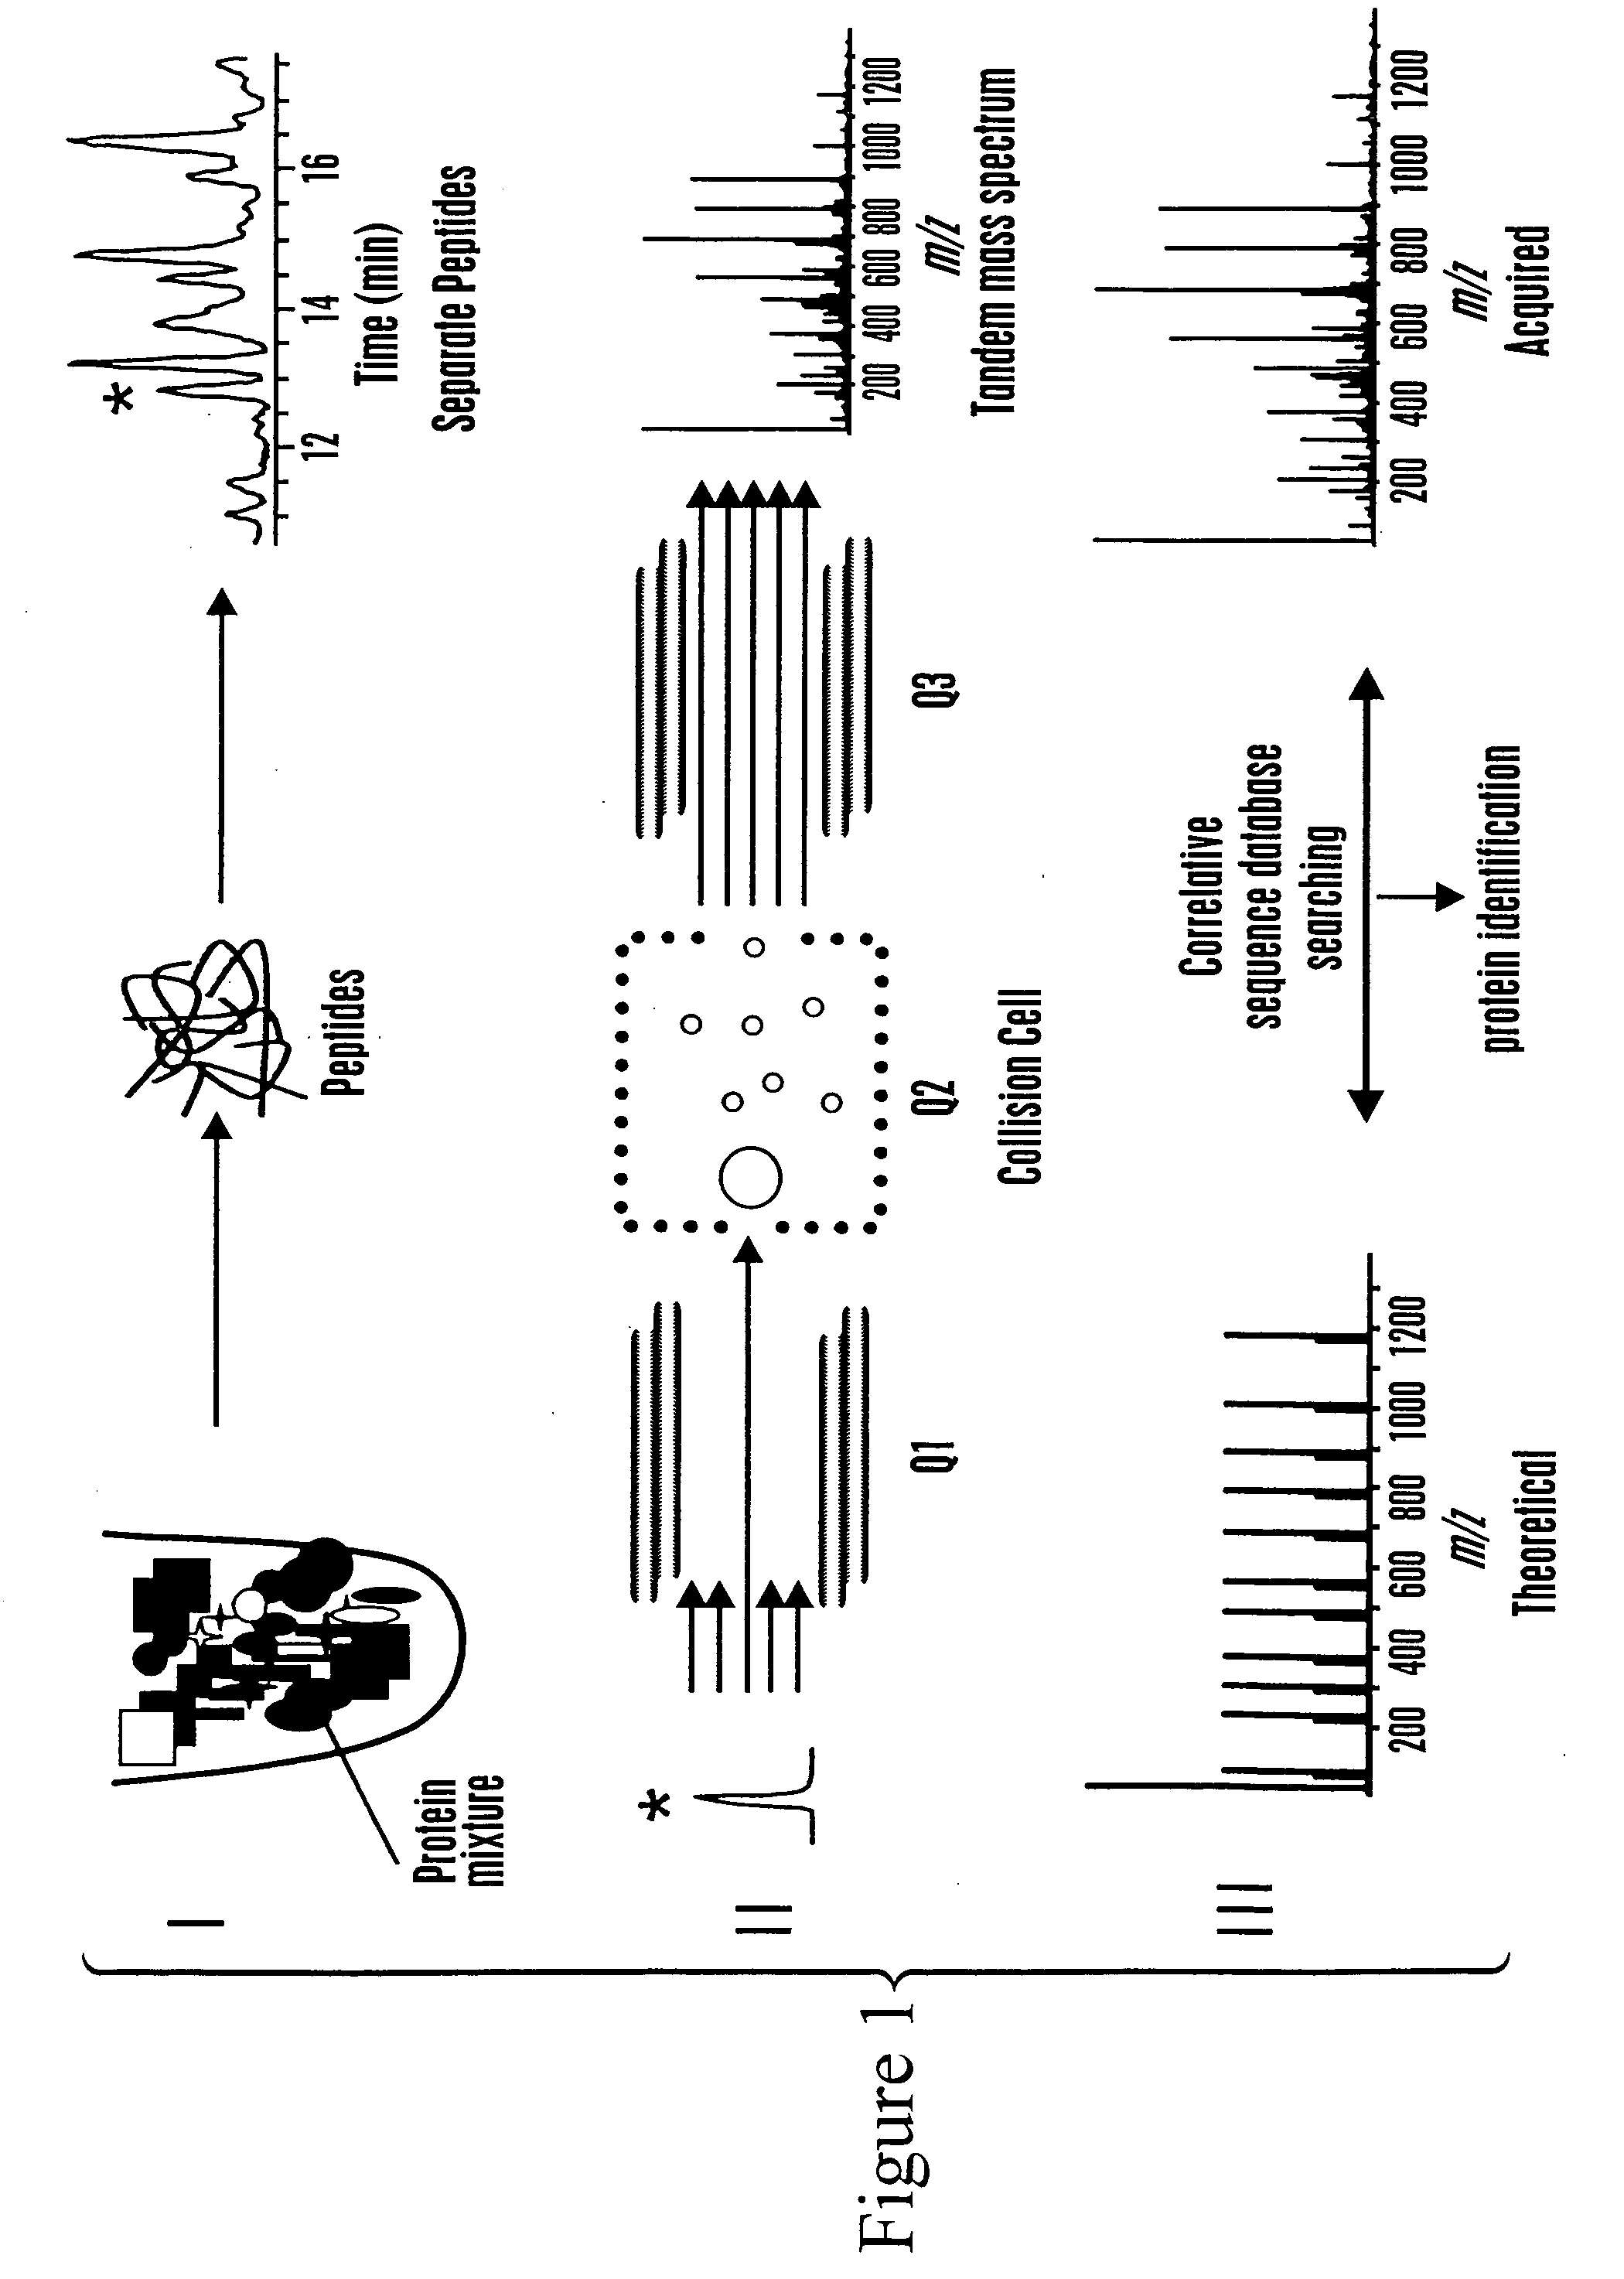 Rapid and quantitative proteome analysis and related methods